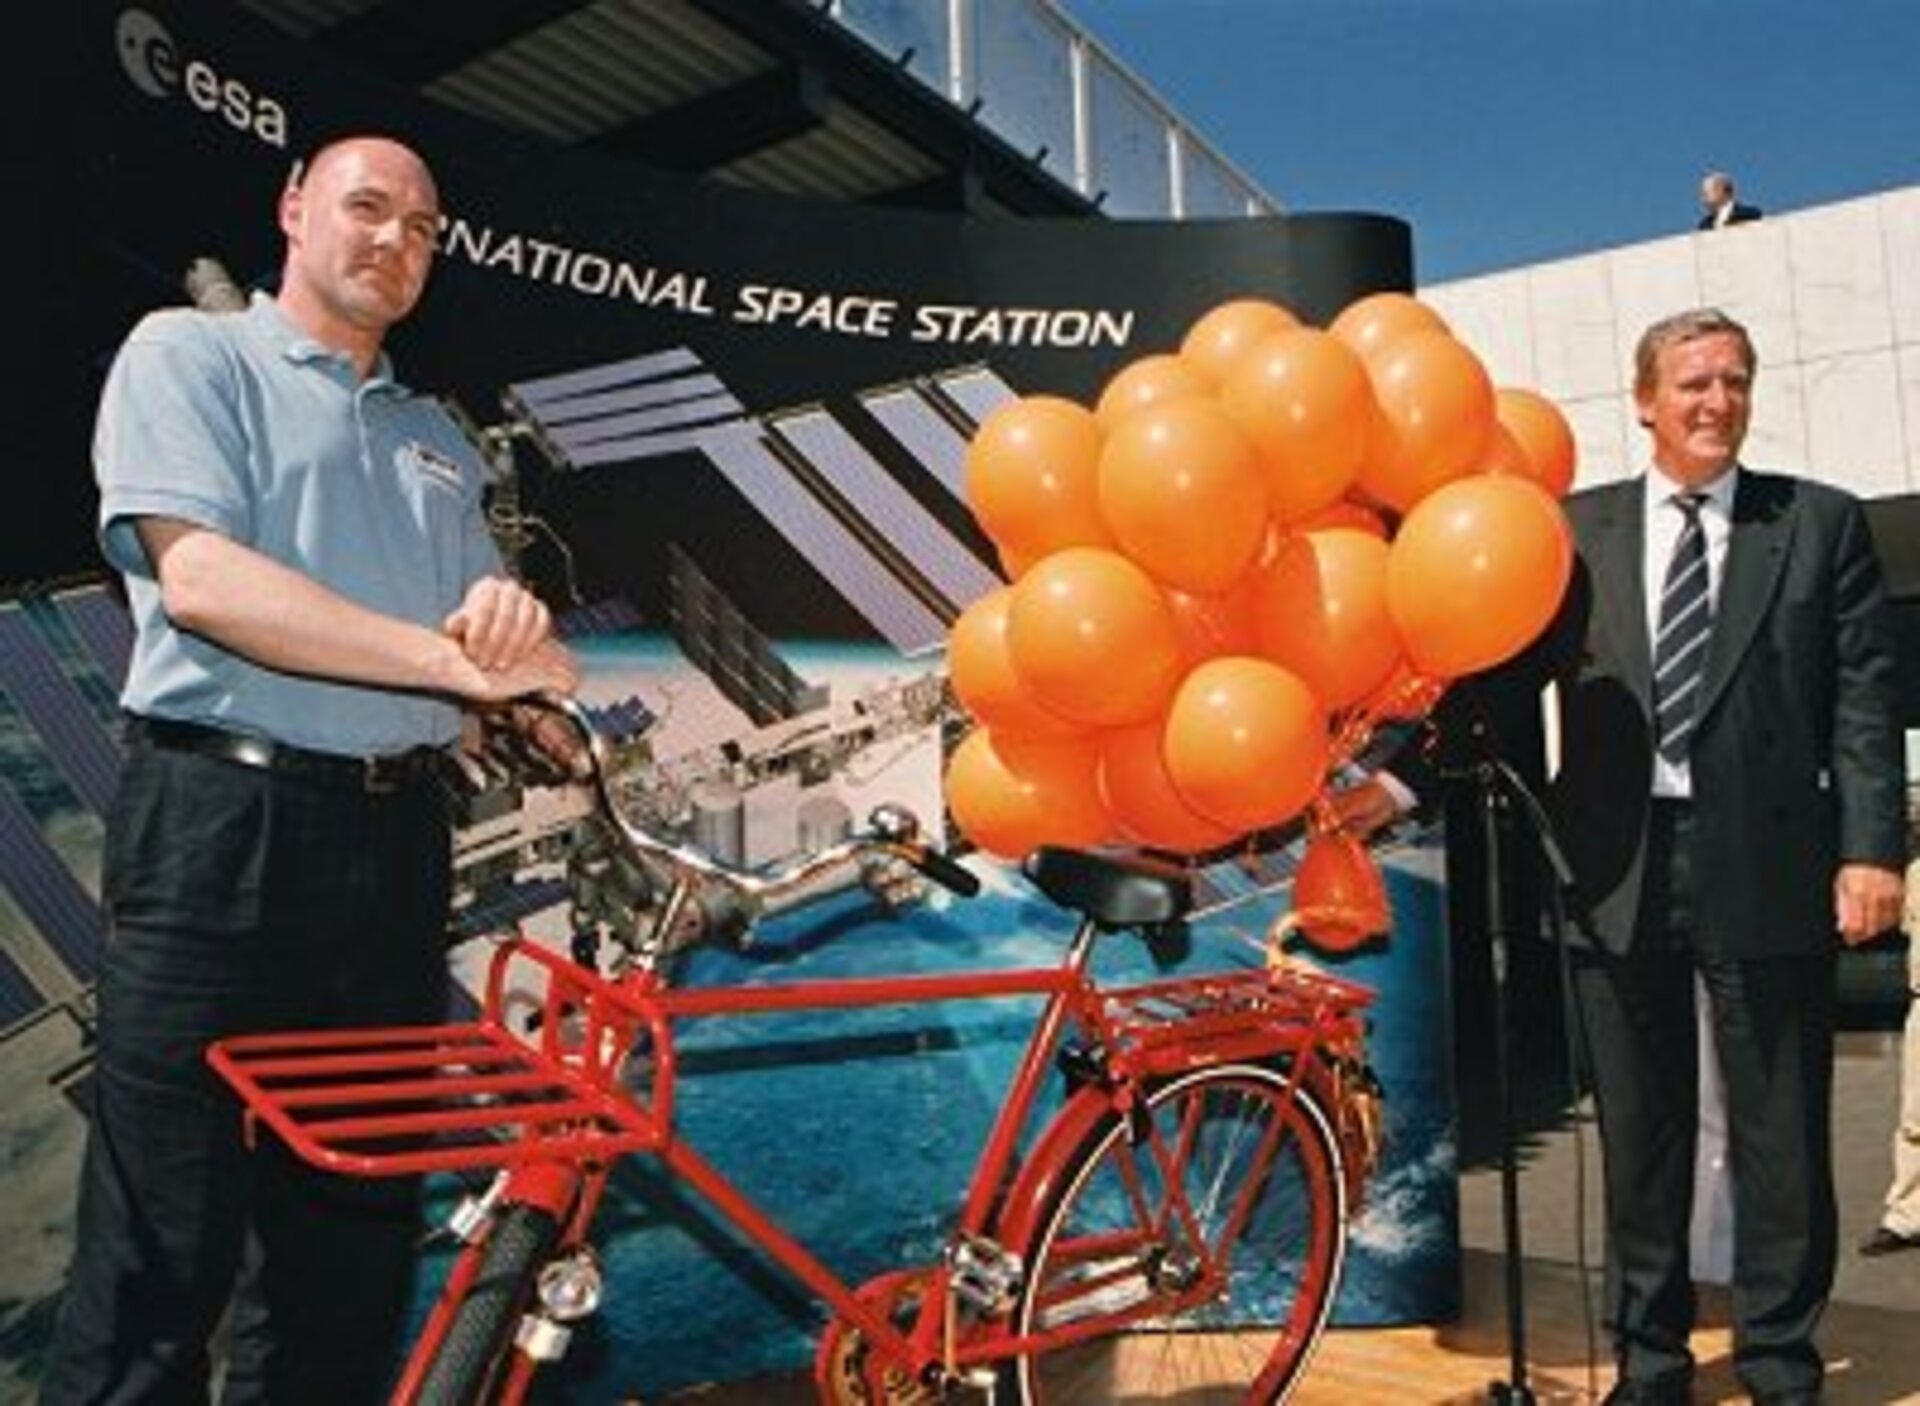 Kuipers is presented with a bicycle by NISO Director Ben Spee